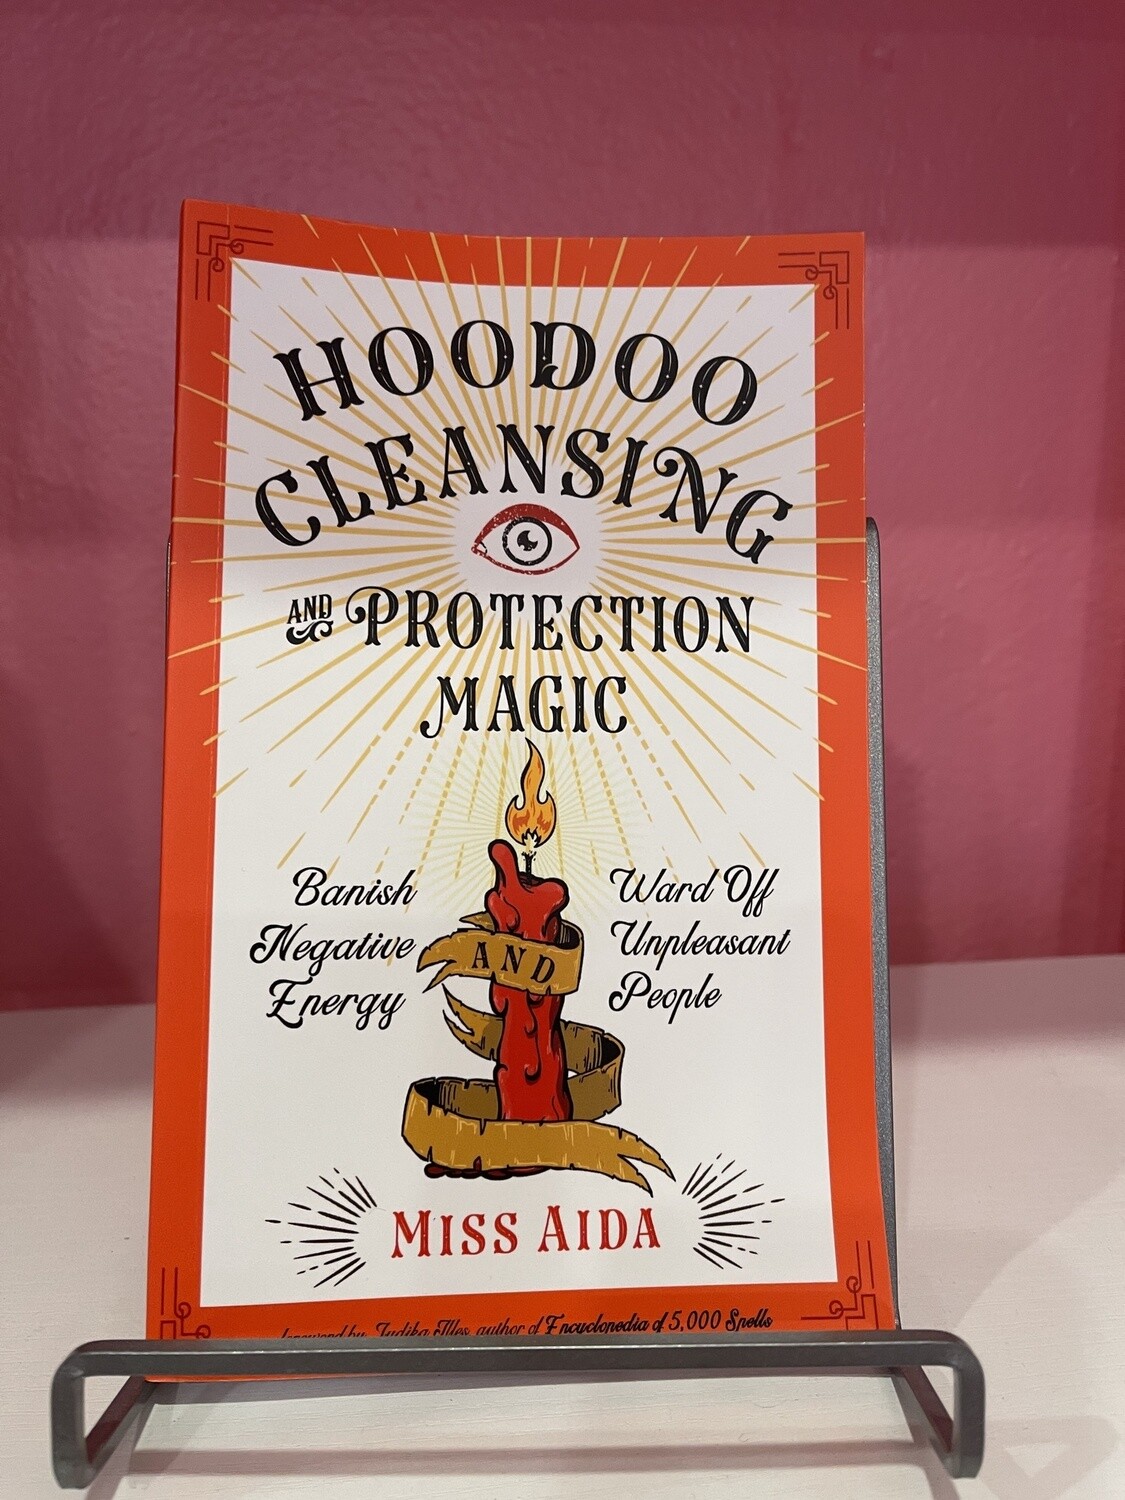 Hoodoo Cleansing And Protection Magic